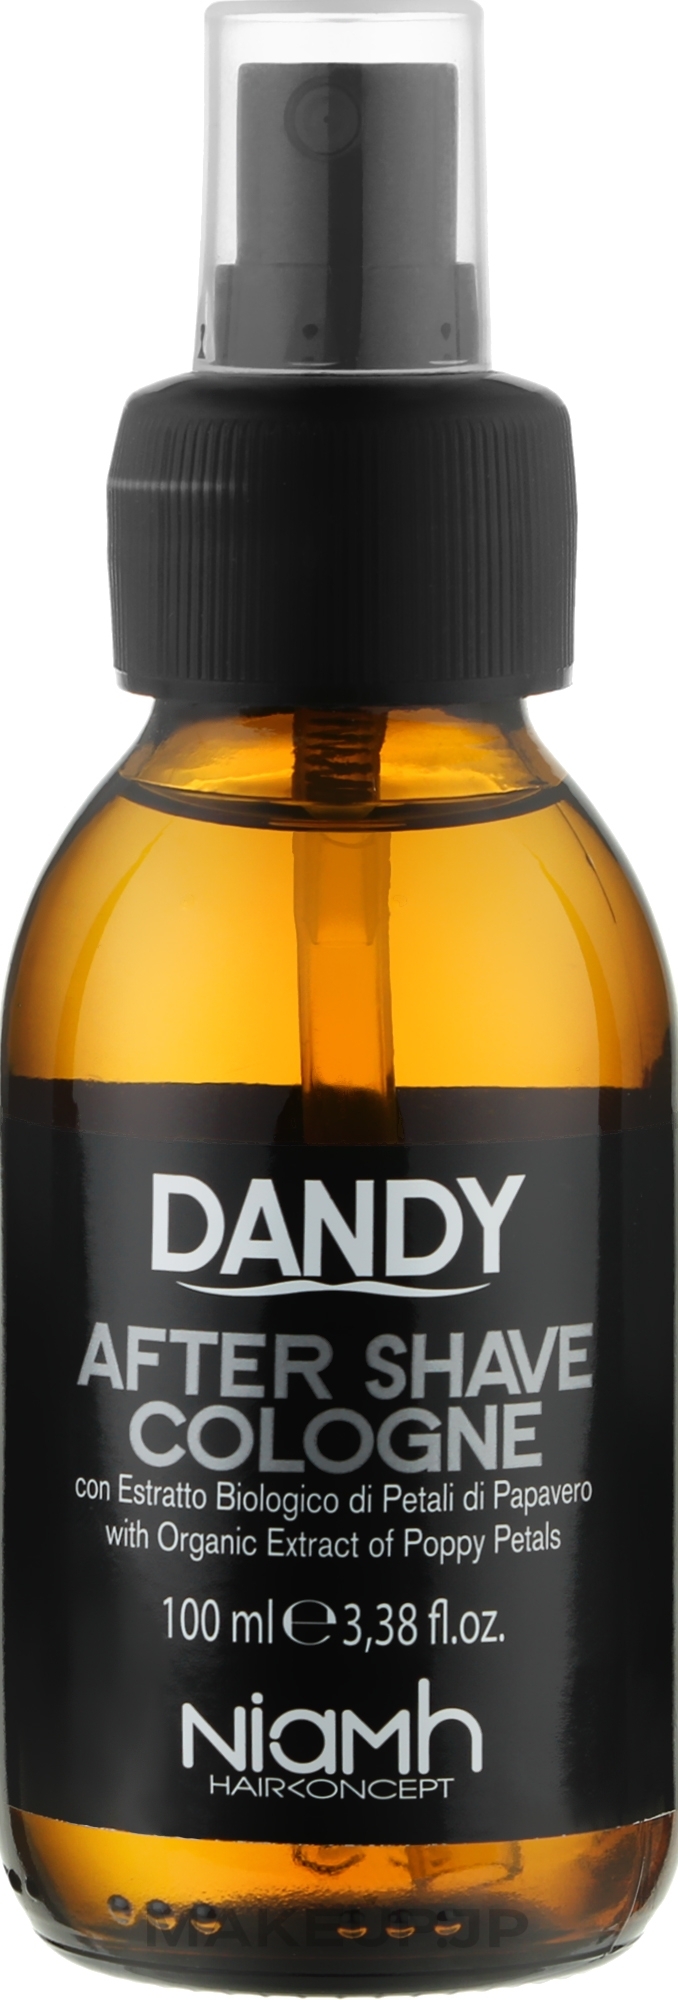 After Shave Cologne - Niamh Hairconcept Dandy After Shave Aftershave Cologne — photo 100 ml